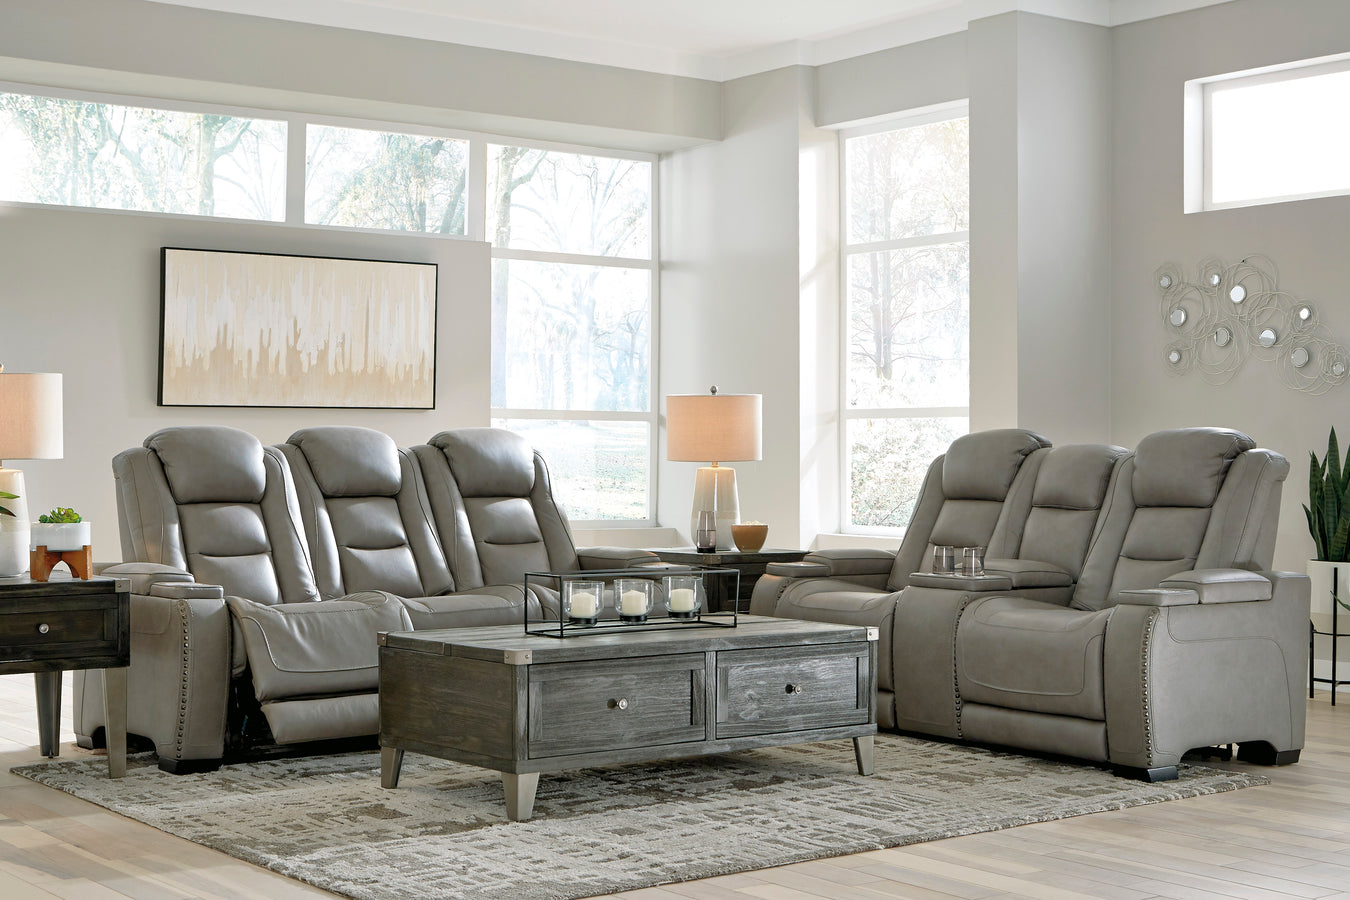 Shop Reclining Furniture at JR Furniture Store in Fayetteville, NC 28311